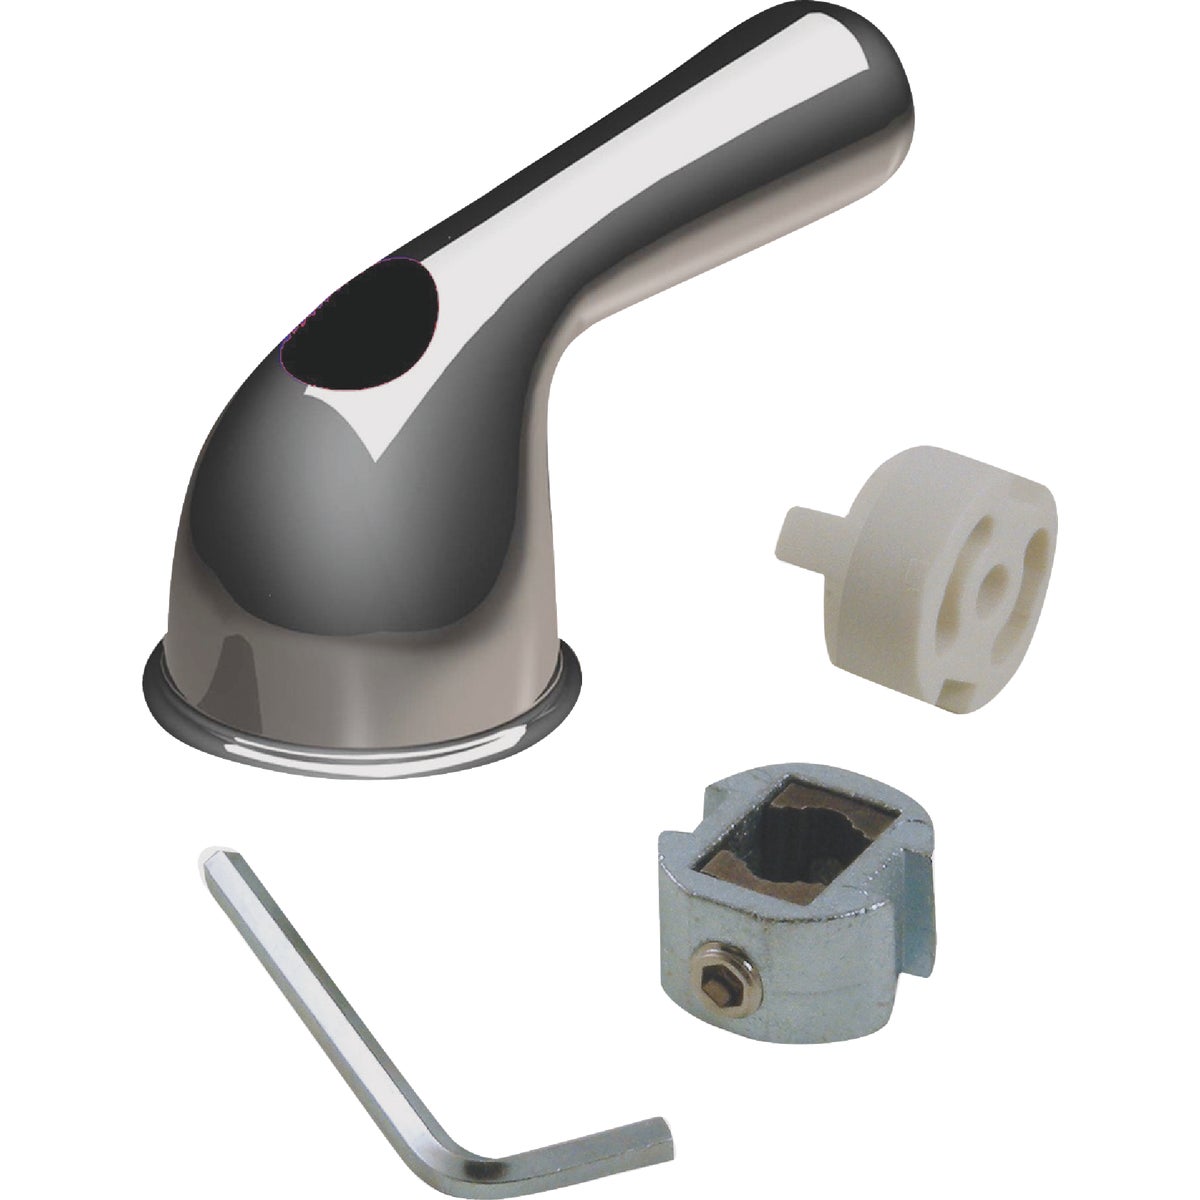 Item 453084, New style lever handle diverter. Includes vice grip adapter.